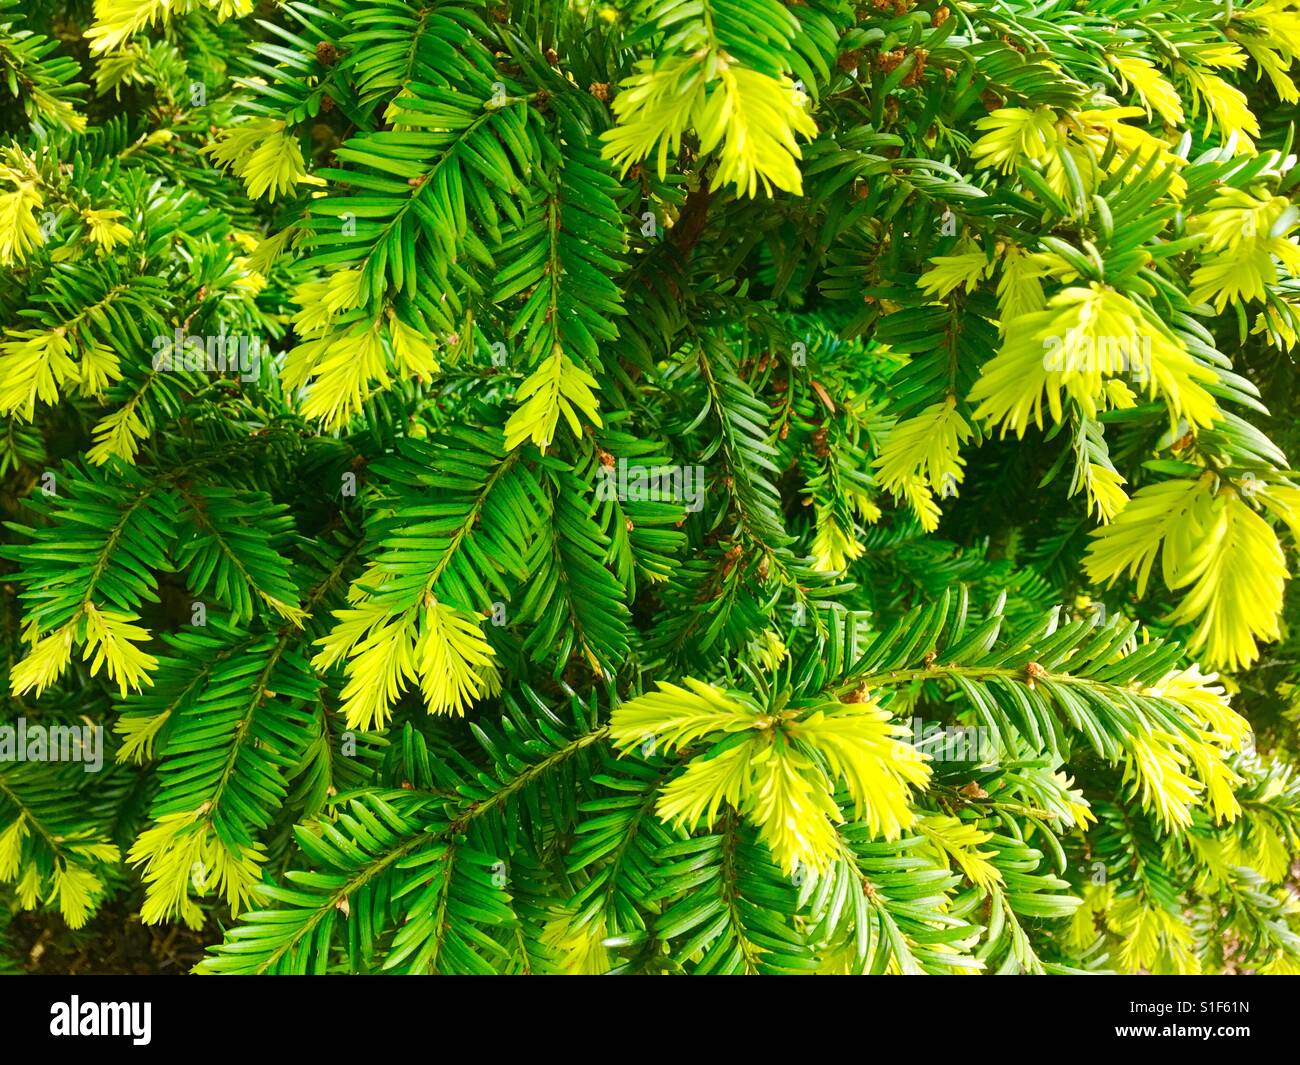 New growth on the evergreen tree Stock Photo